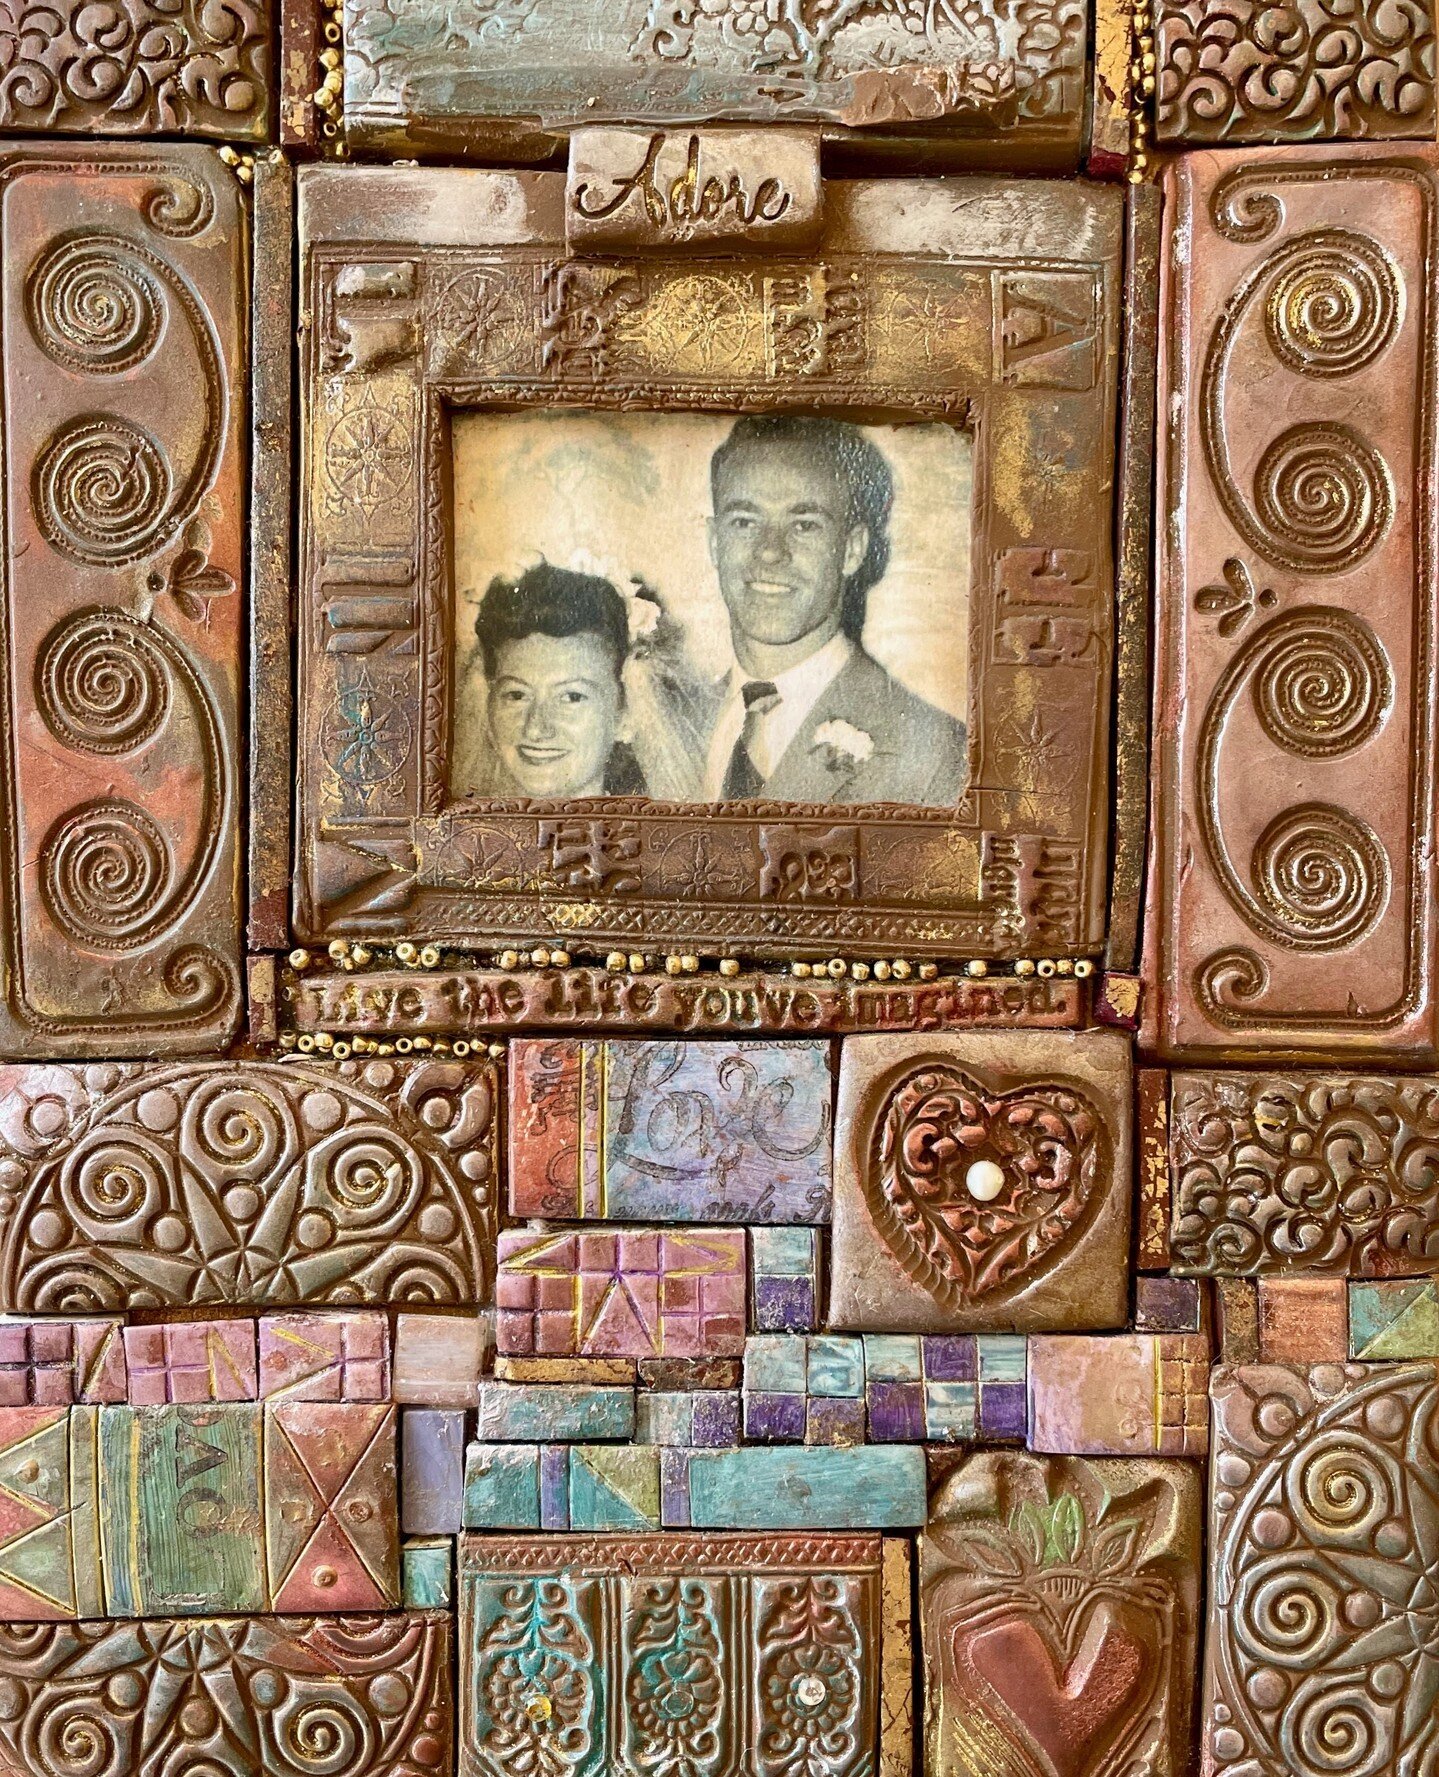 Honor the Man in Your Life with a Gratitude or Commemorative Mosaic⁠
⁠
Date: Saturday, June 3, 2023 |Time: 9:30 AM - 4:30 PM⁠
Location: 111 Riverview Avenue, Waltham, MA (My studio.)⁠
Cost: $125/person plus a supply fee of $35 payable to instructor o